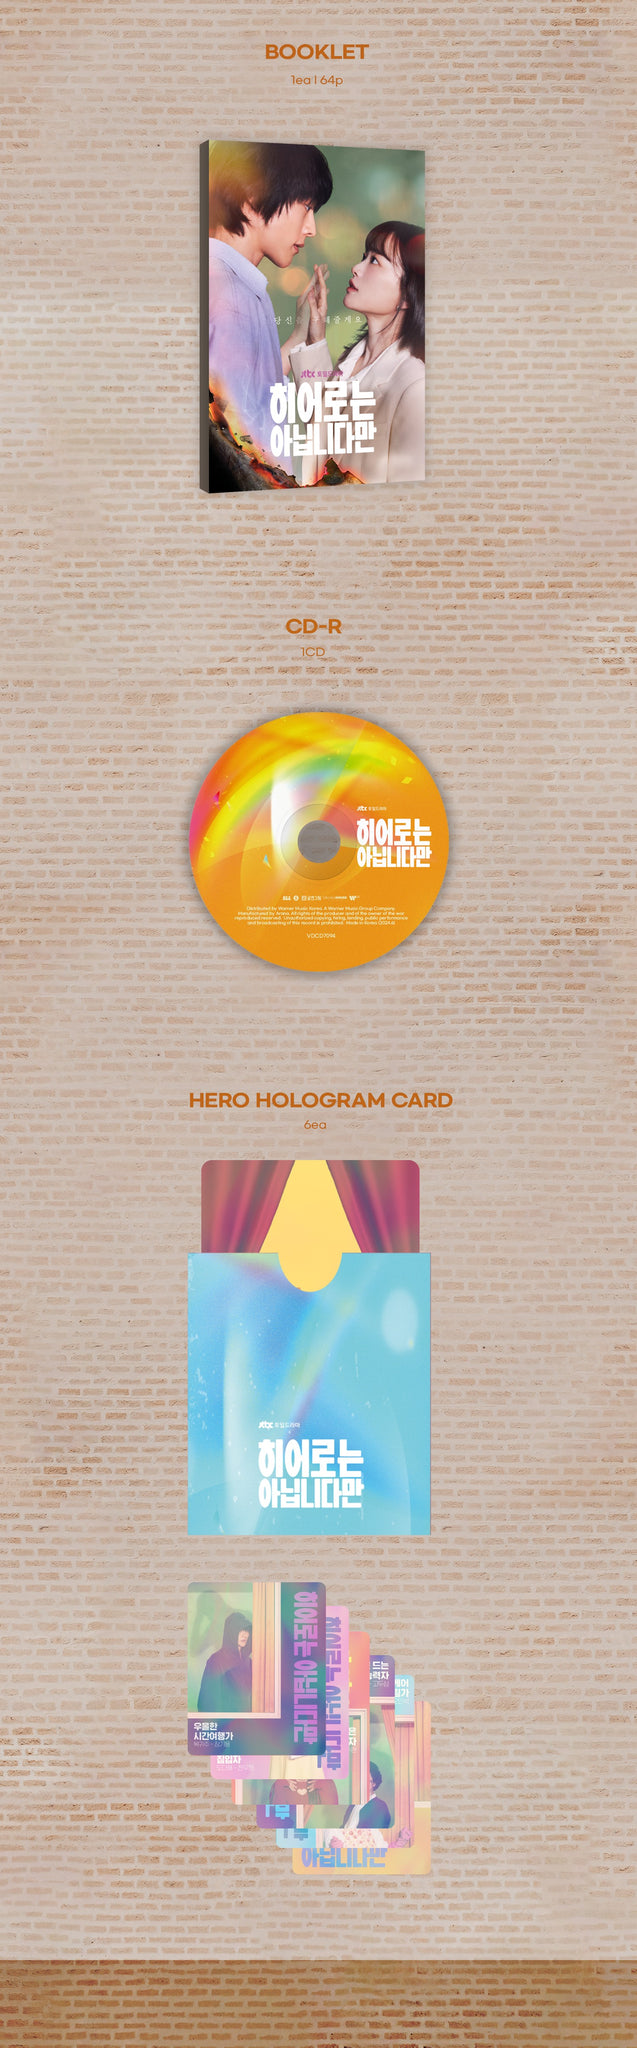 The Atypical Family OST Inclusions: Booklet, CD, Hero Hologram Card Set